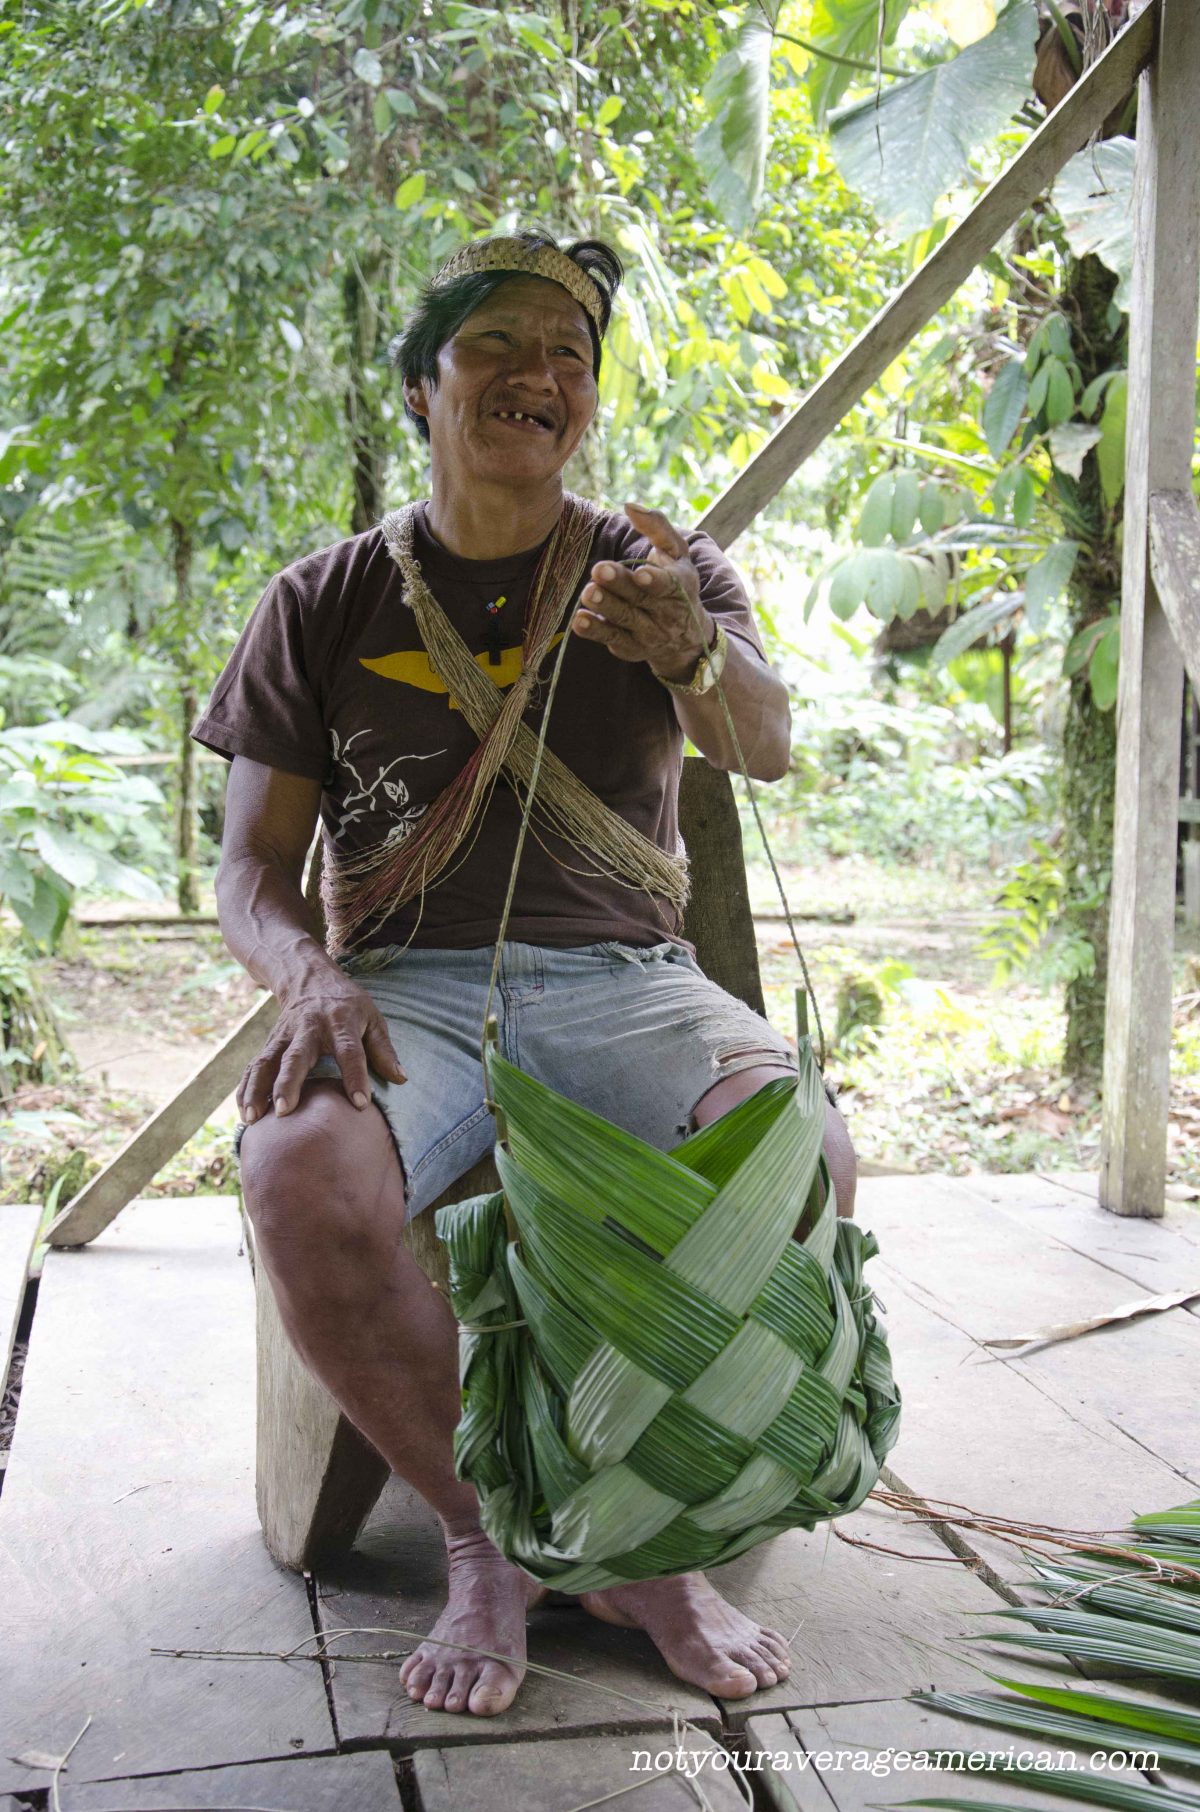 Our Huaorani guide, Bai, taught us how to make a basket that could be used for carrying freshly hunted meat or just harvested plants from the jungle | ©Angela Drake